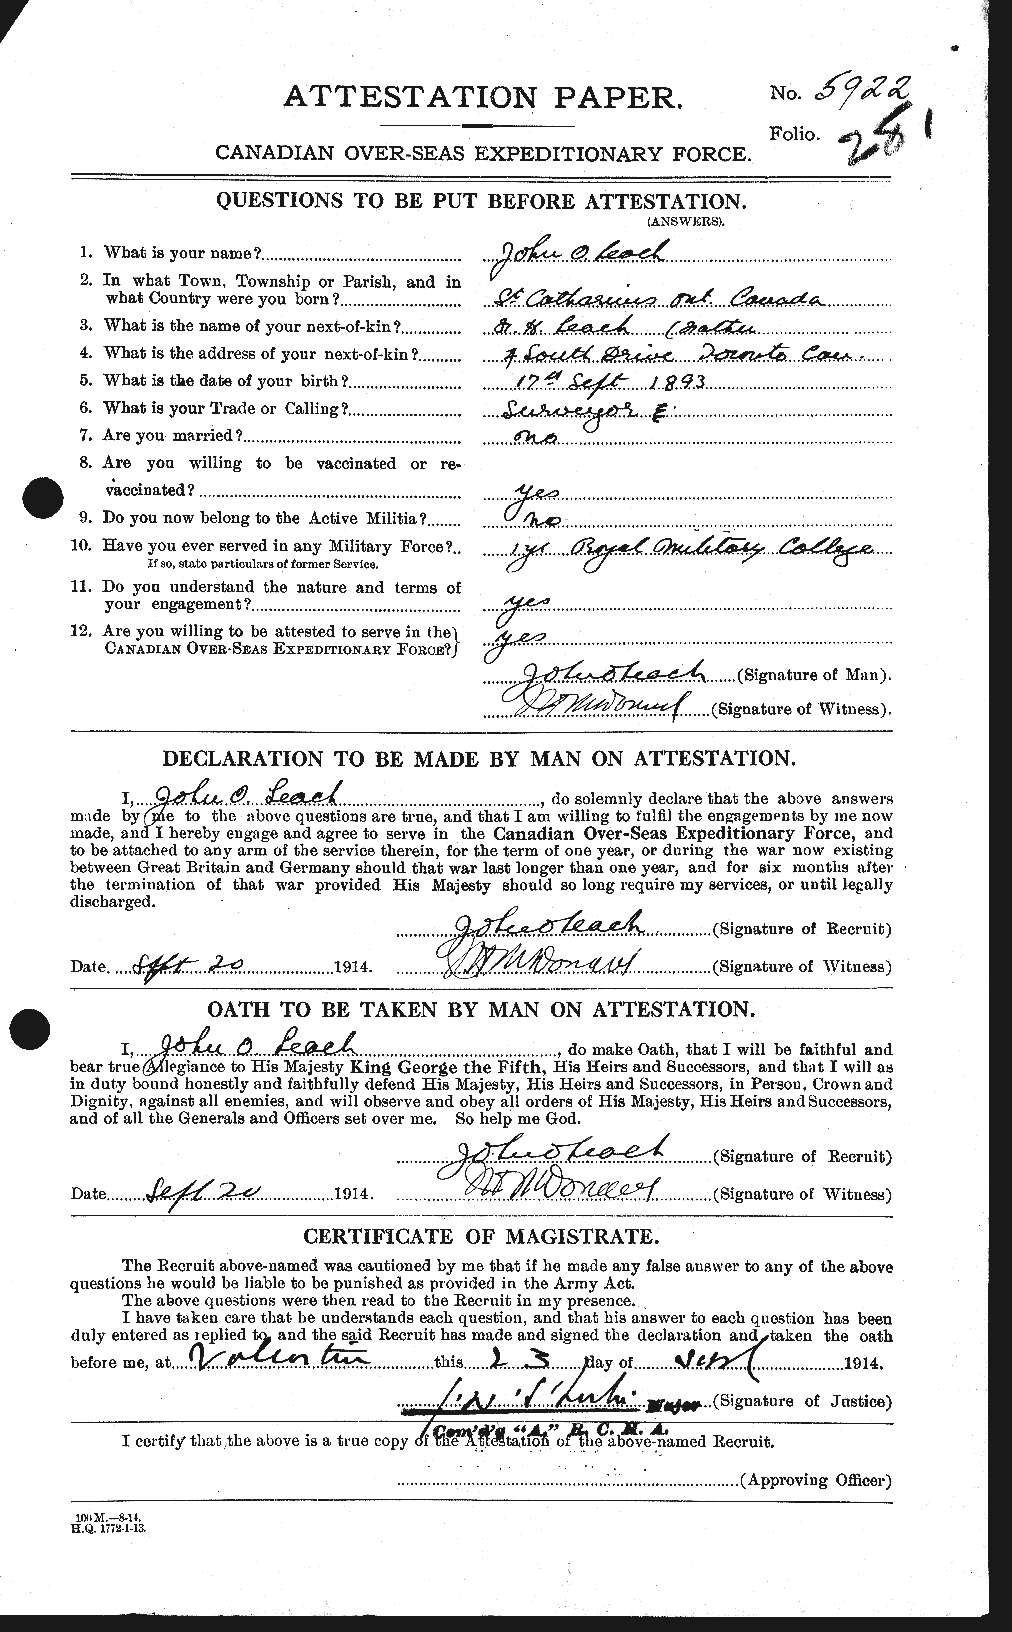 Personnel Records of the First World War - CEF 453396a